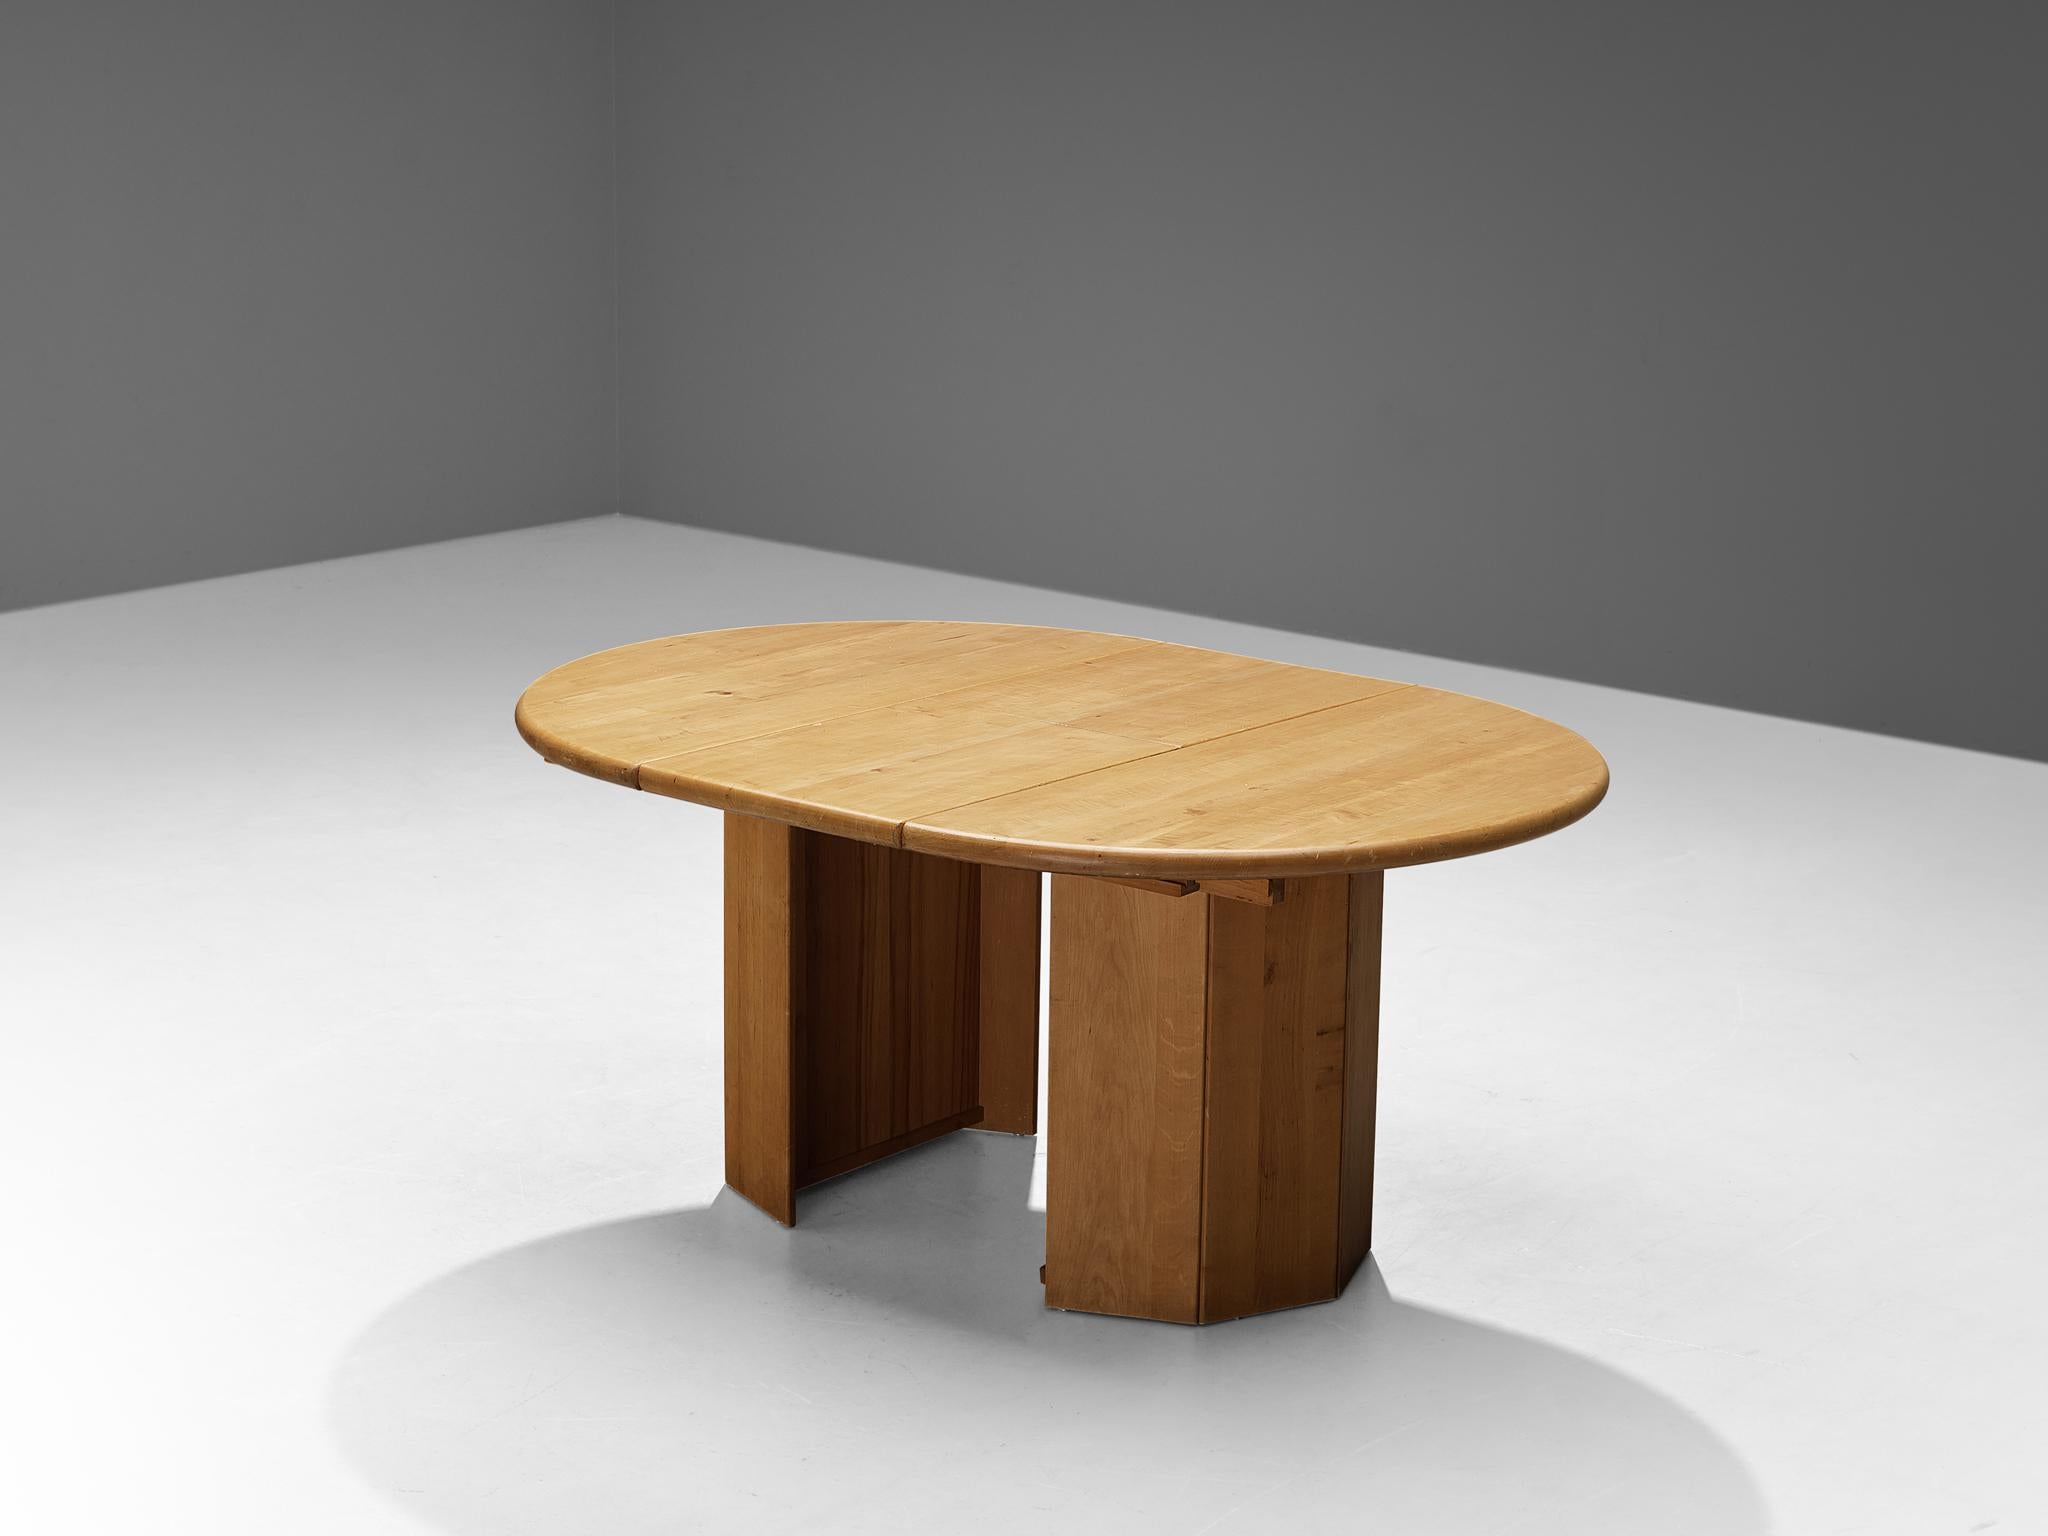 Dining table, maple, France, 1970s

Beautiful and natural dining table made in France in the 1970s. This table is executed in a very smooth and softly textured maple wood. The base of the table is made out of two half circular legs, that are